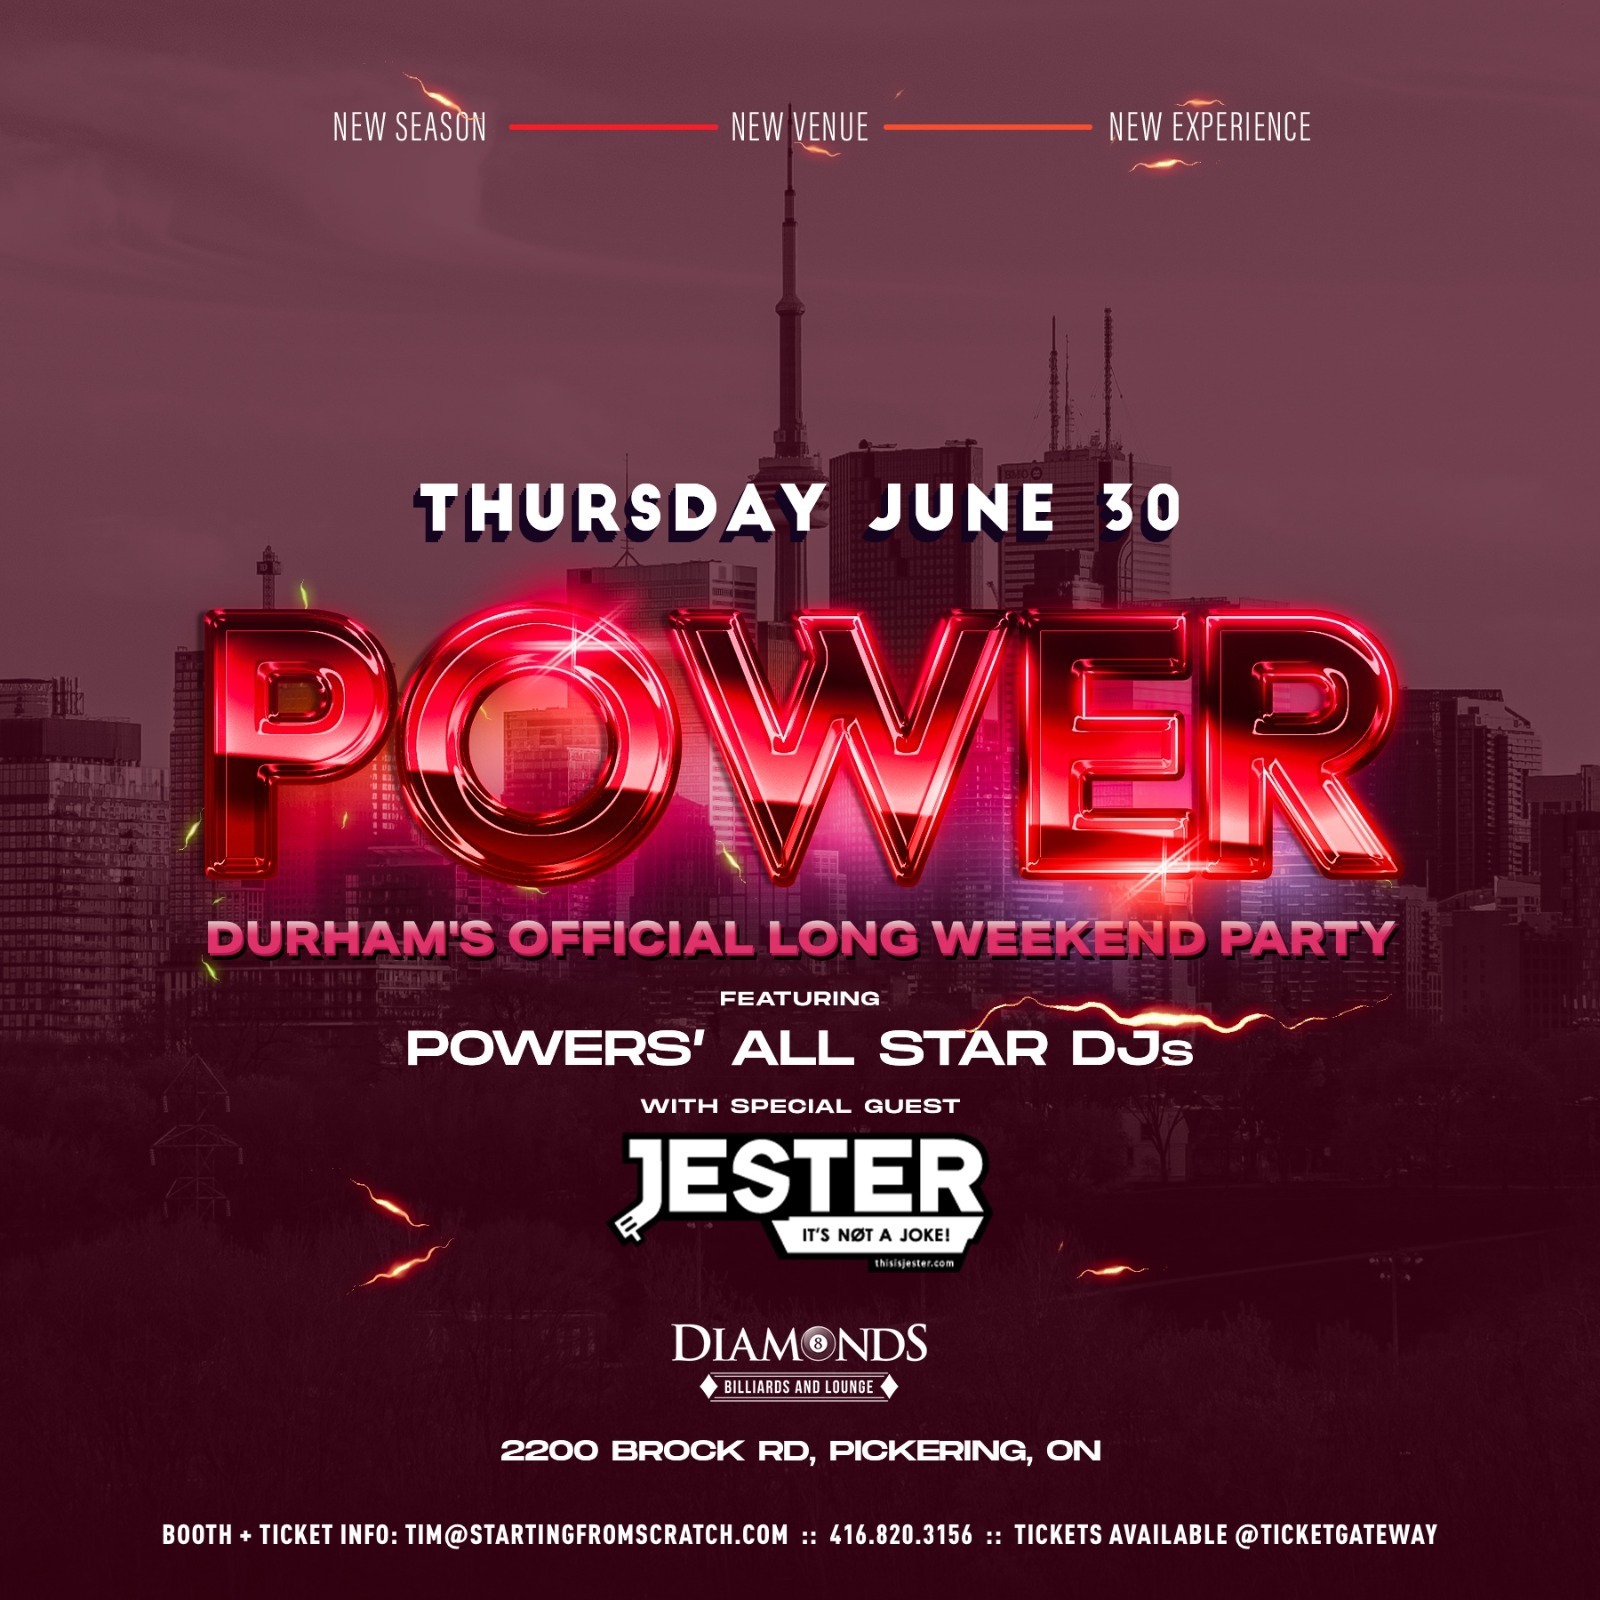 POWER - DURHAMS OFFICIAL LONG WEEKEND PARTY - THURSDAY JUNE 30 